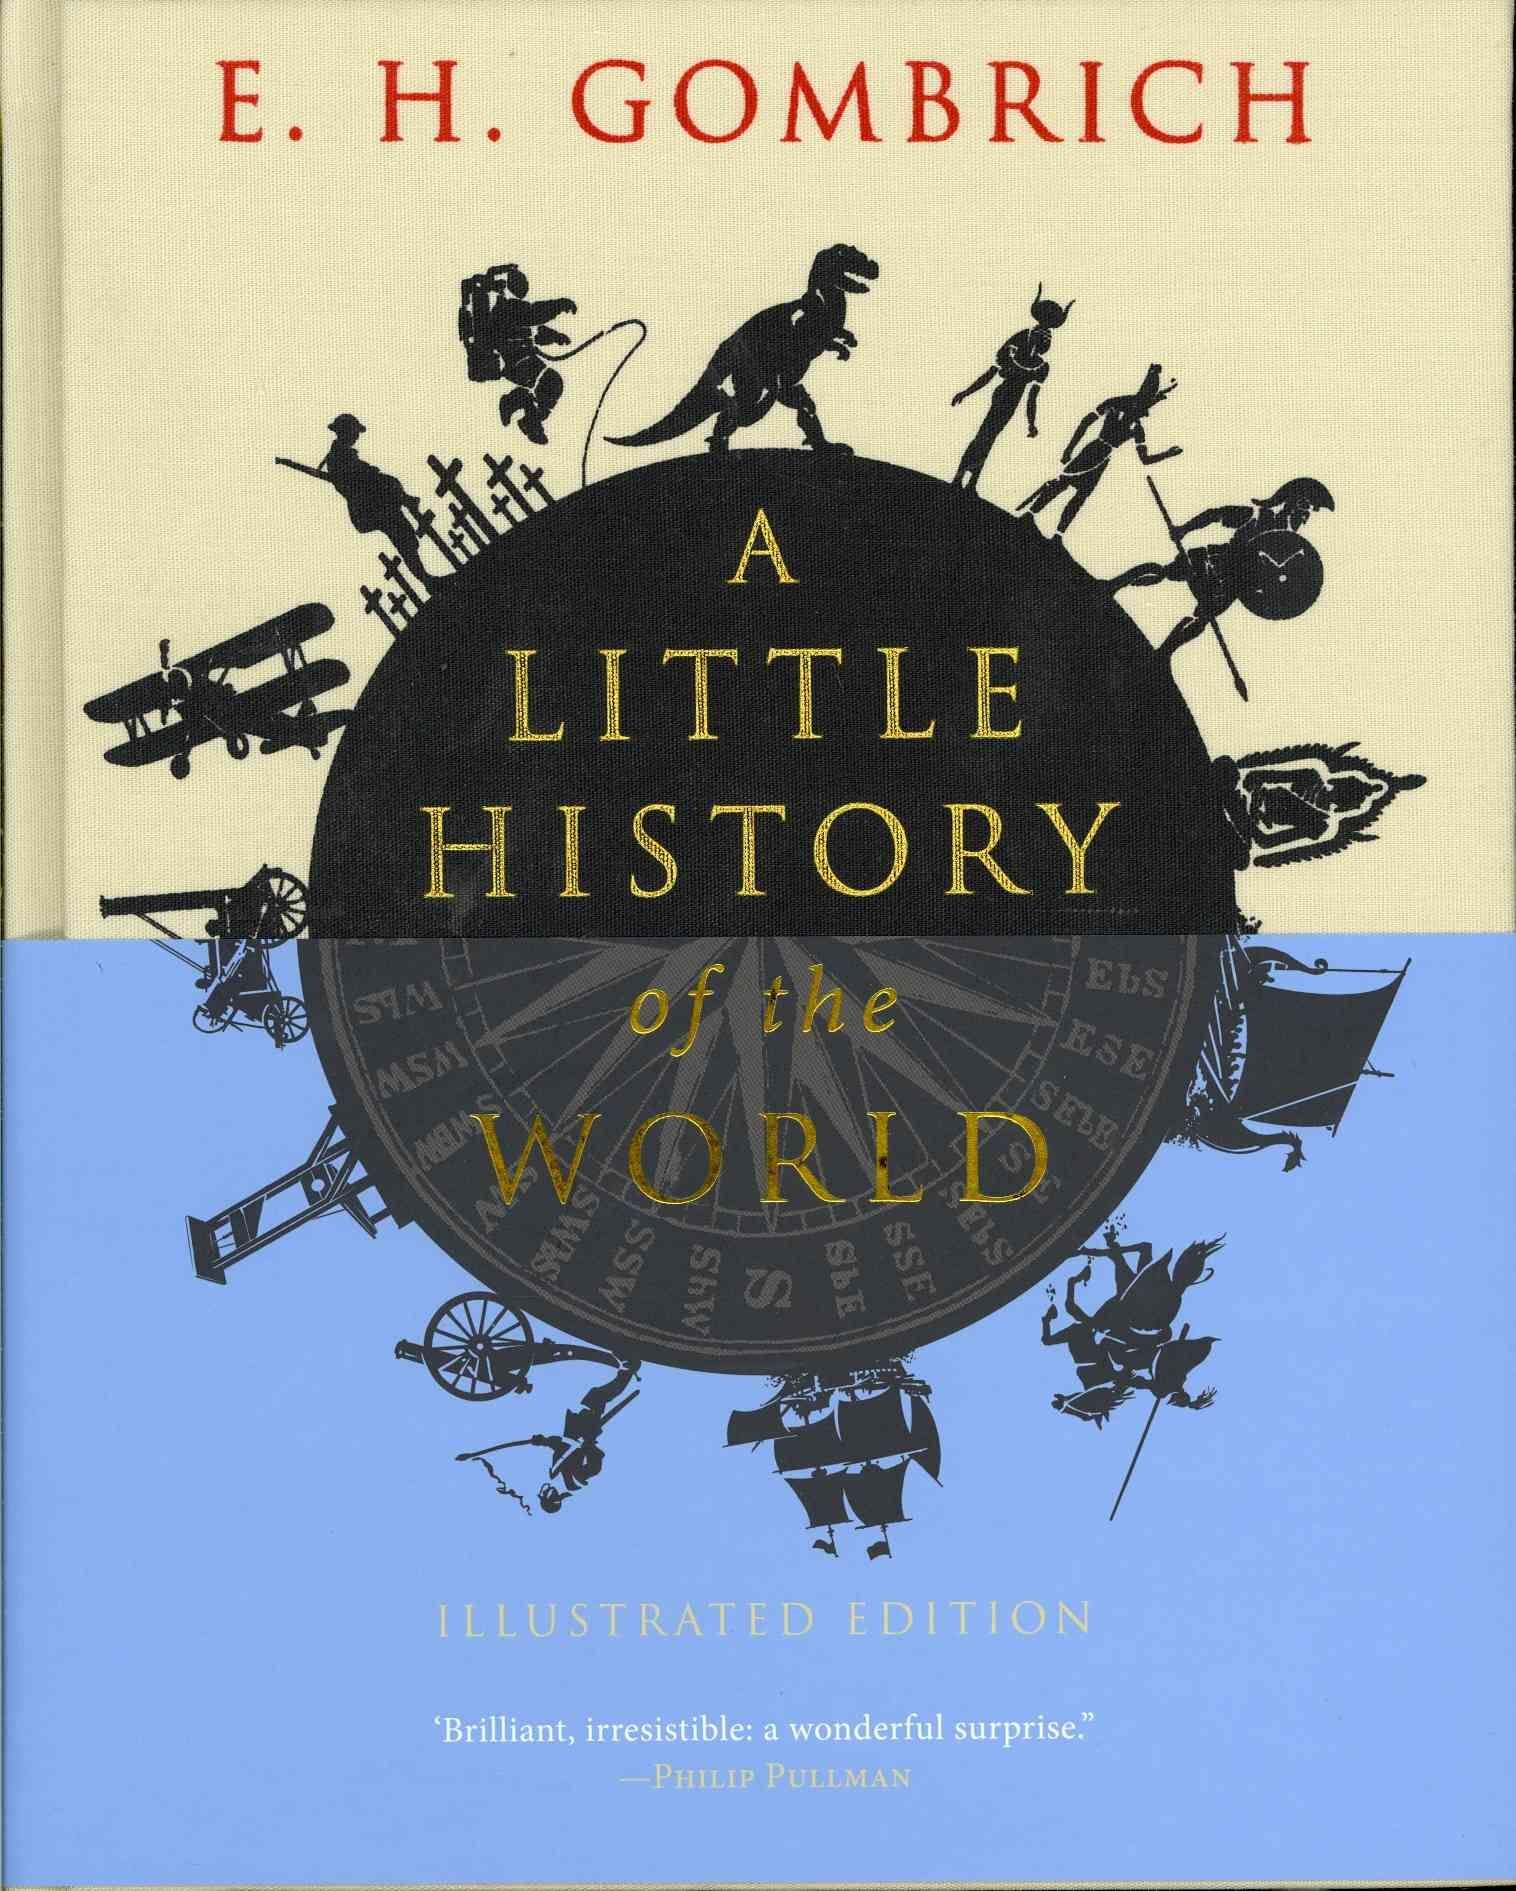 a little history of the world by ernst gombrich